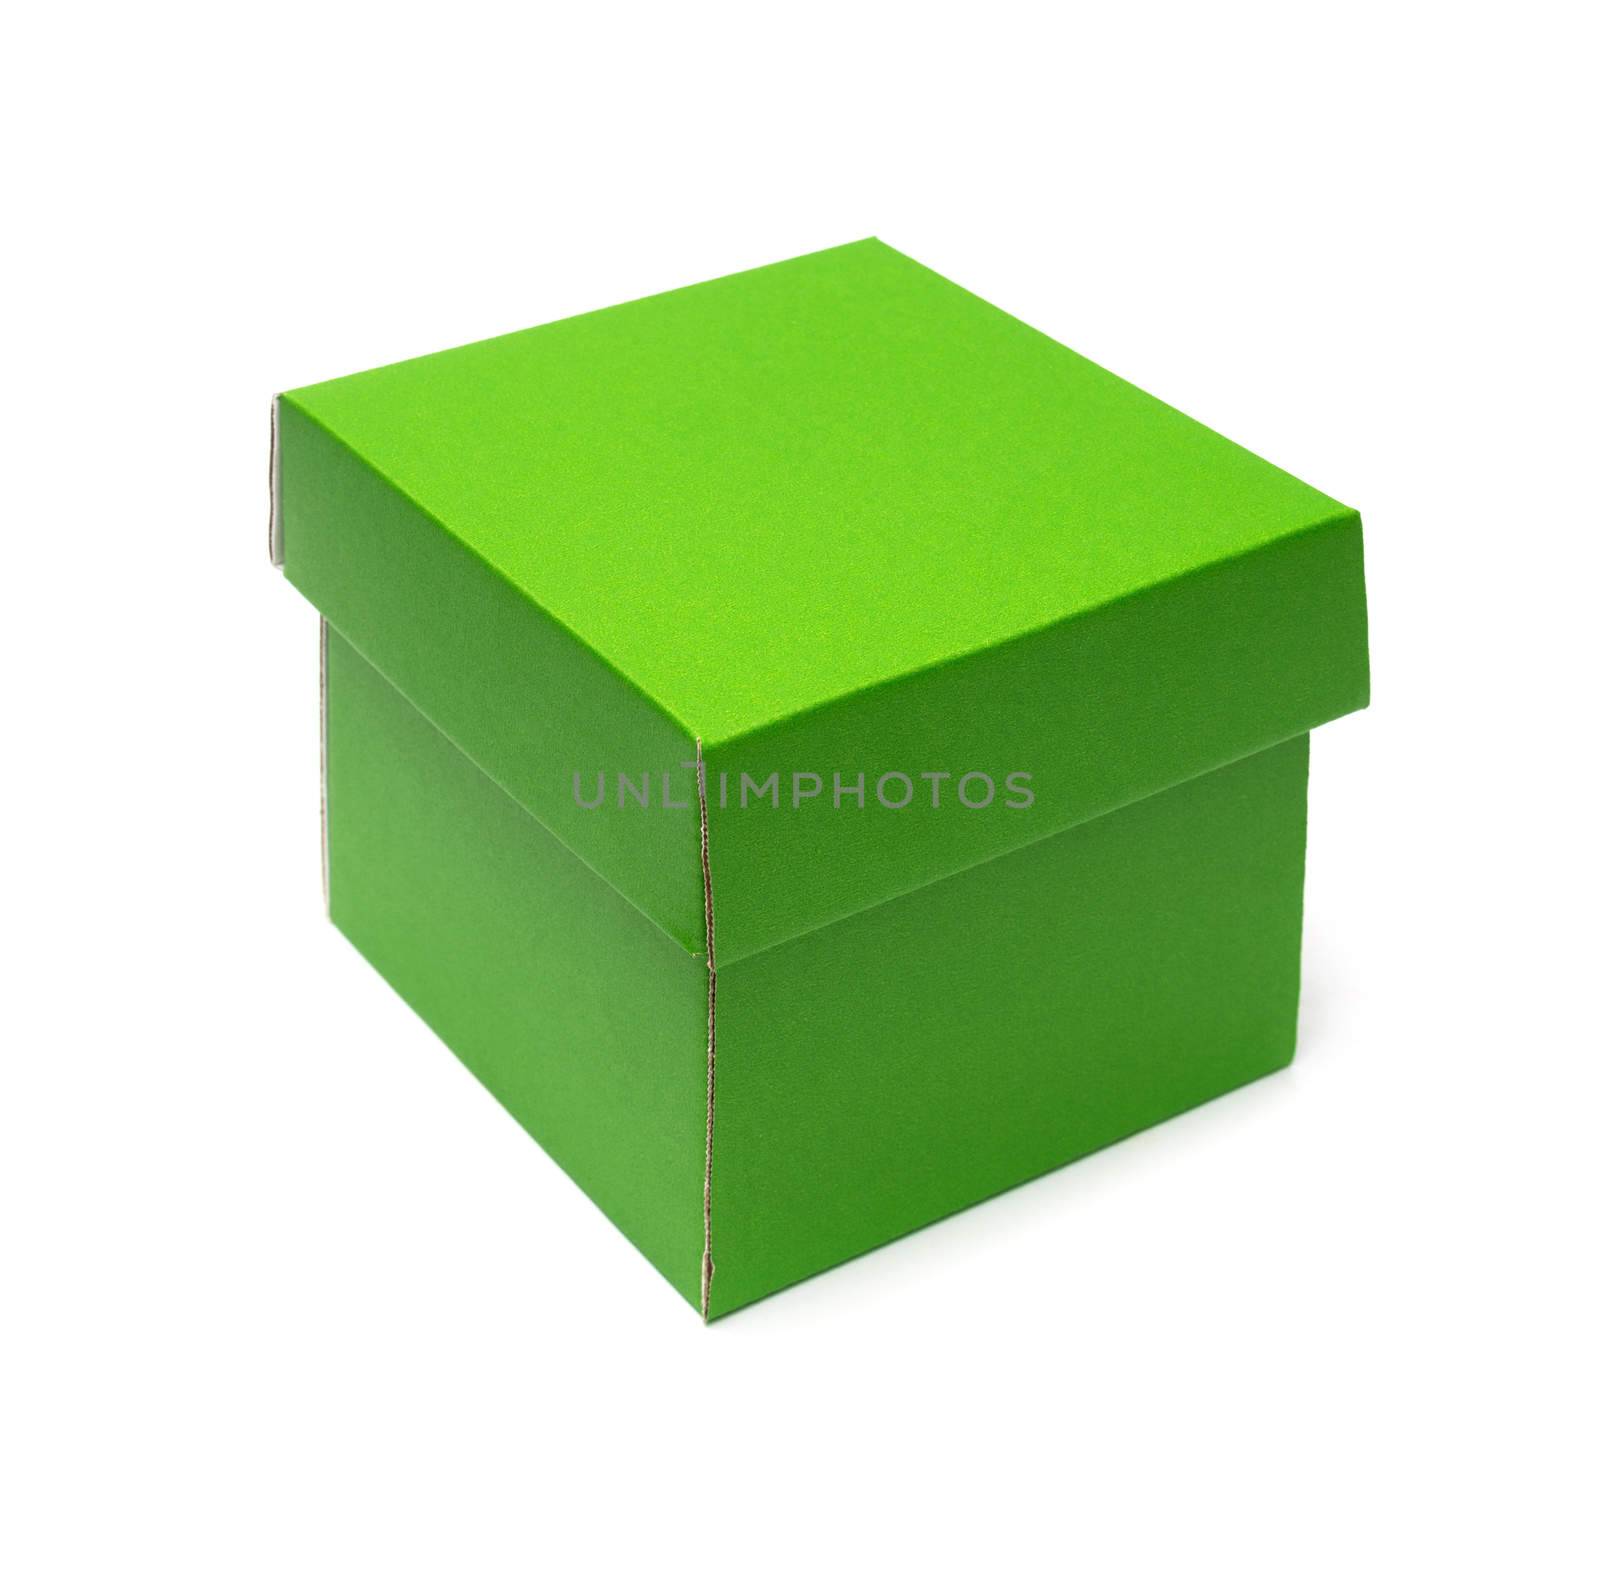 green cardboard box on a white background by DNKSTUDIO